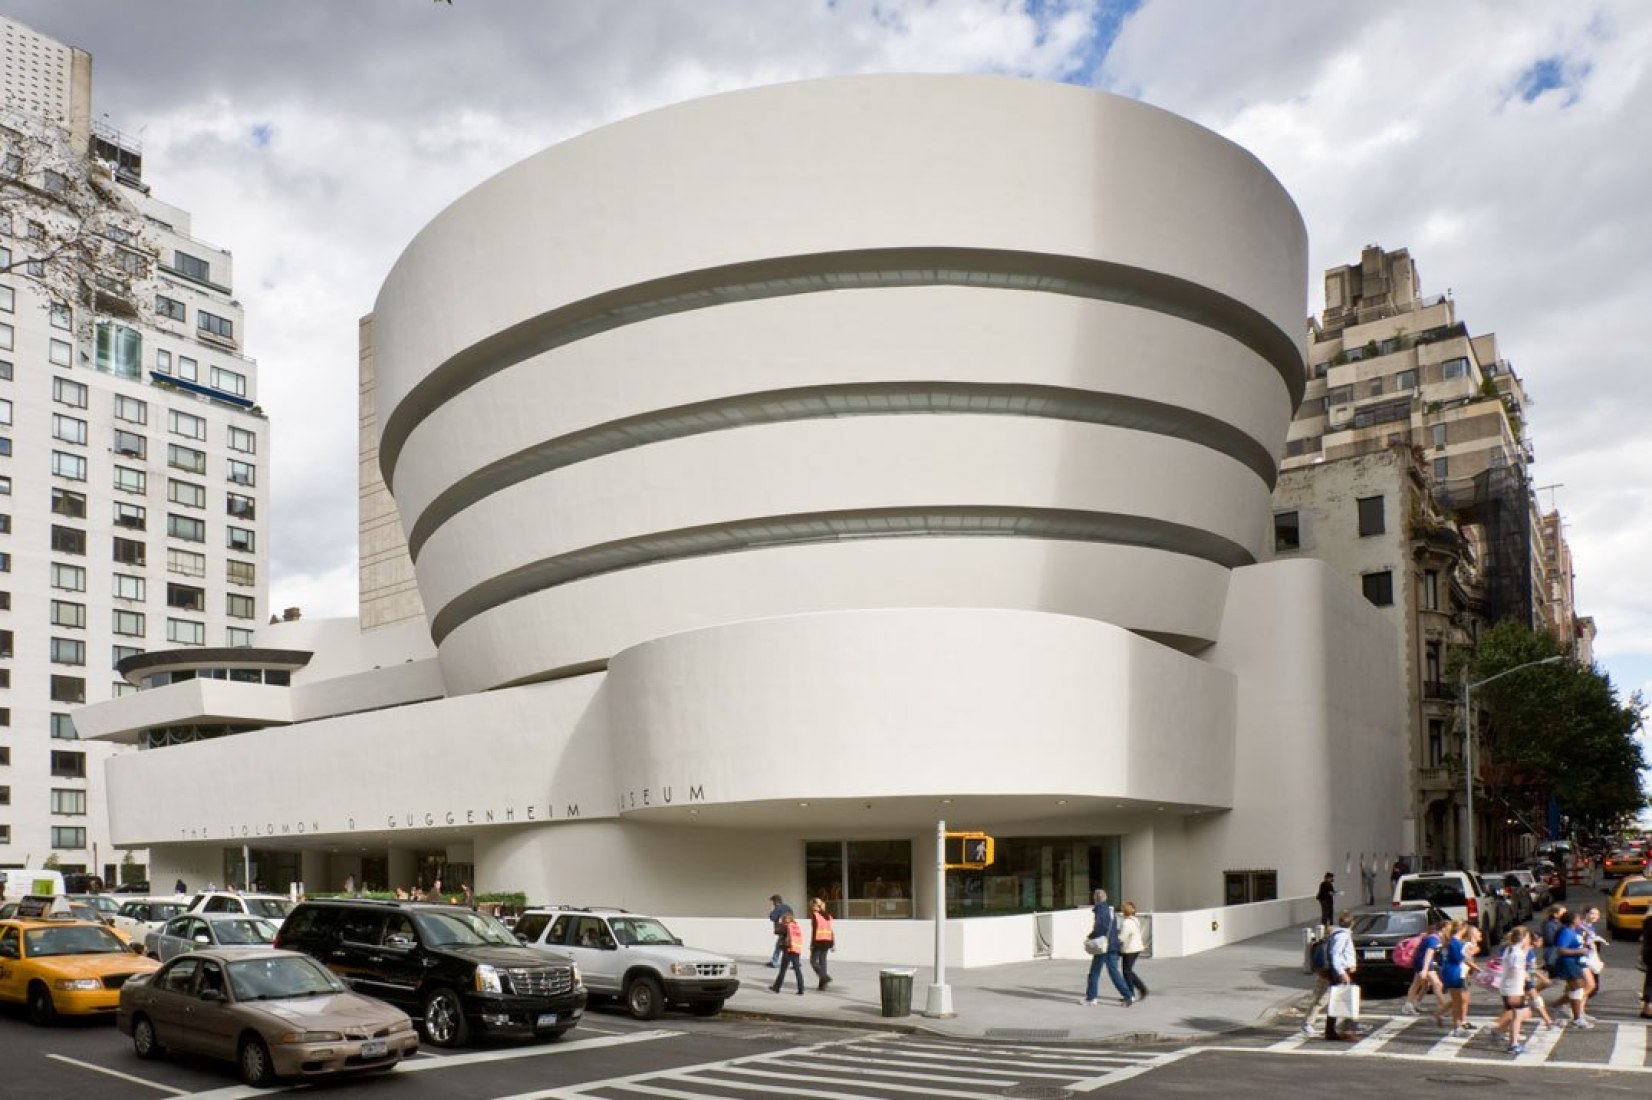 The Solomon R. Guggenheim's restored facade was revealed in fall 2008. Photography © David Heald. (Courtesy the Guggenheim Foundation)